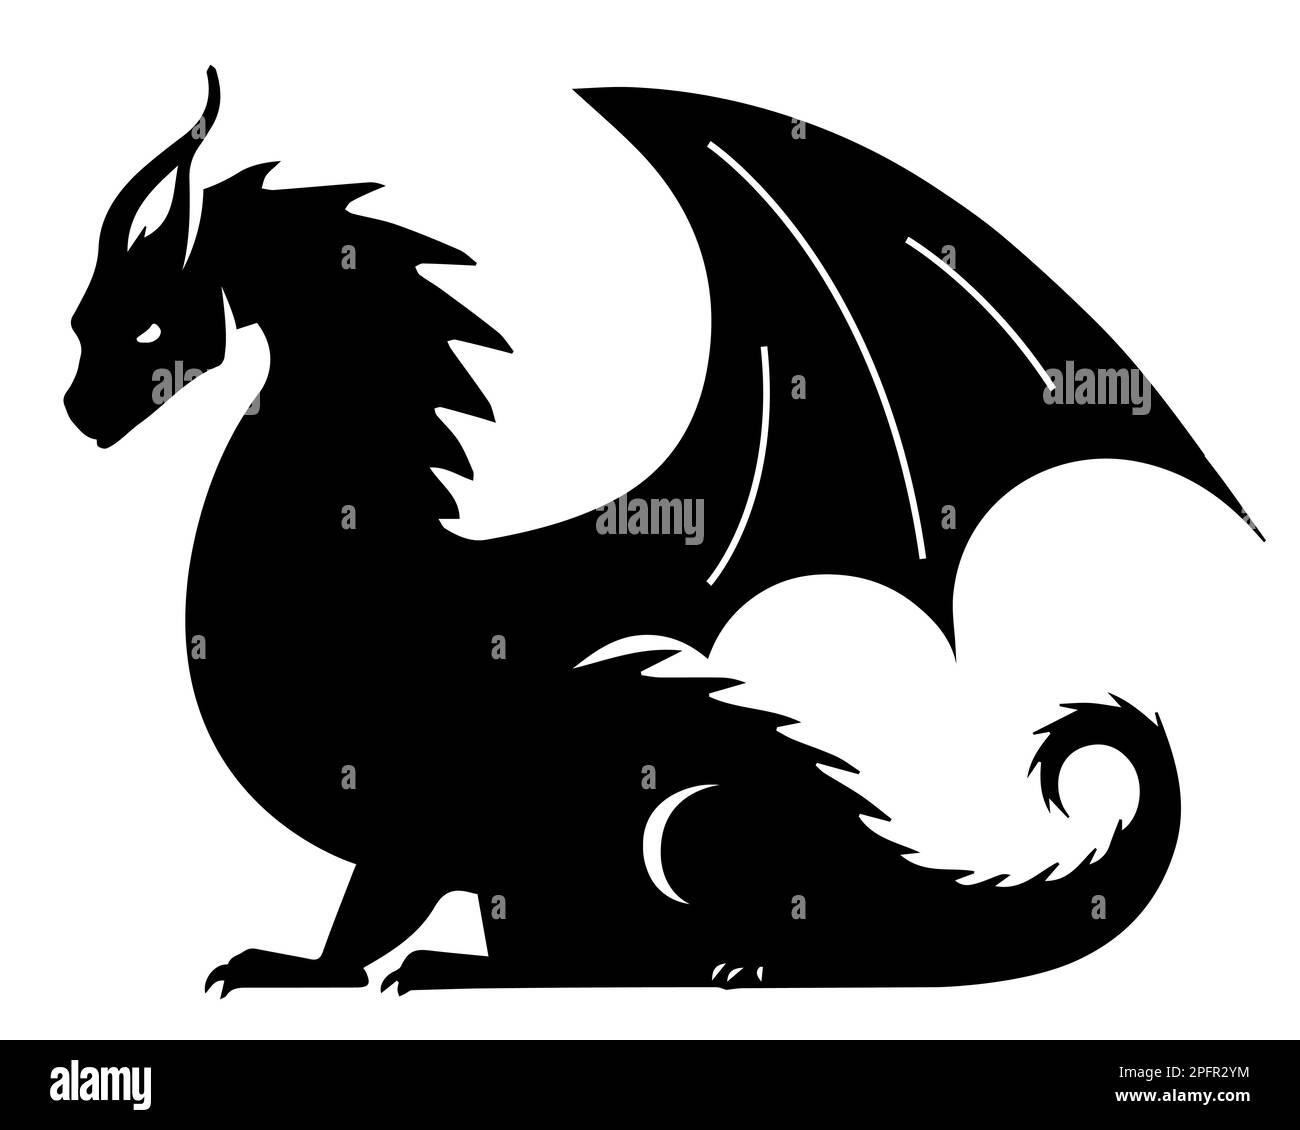 black silhouette of a dragon on a white background. fire-breathing snake. flat vector illustration. Stock Vector